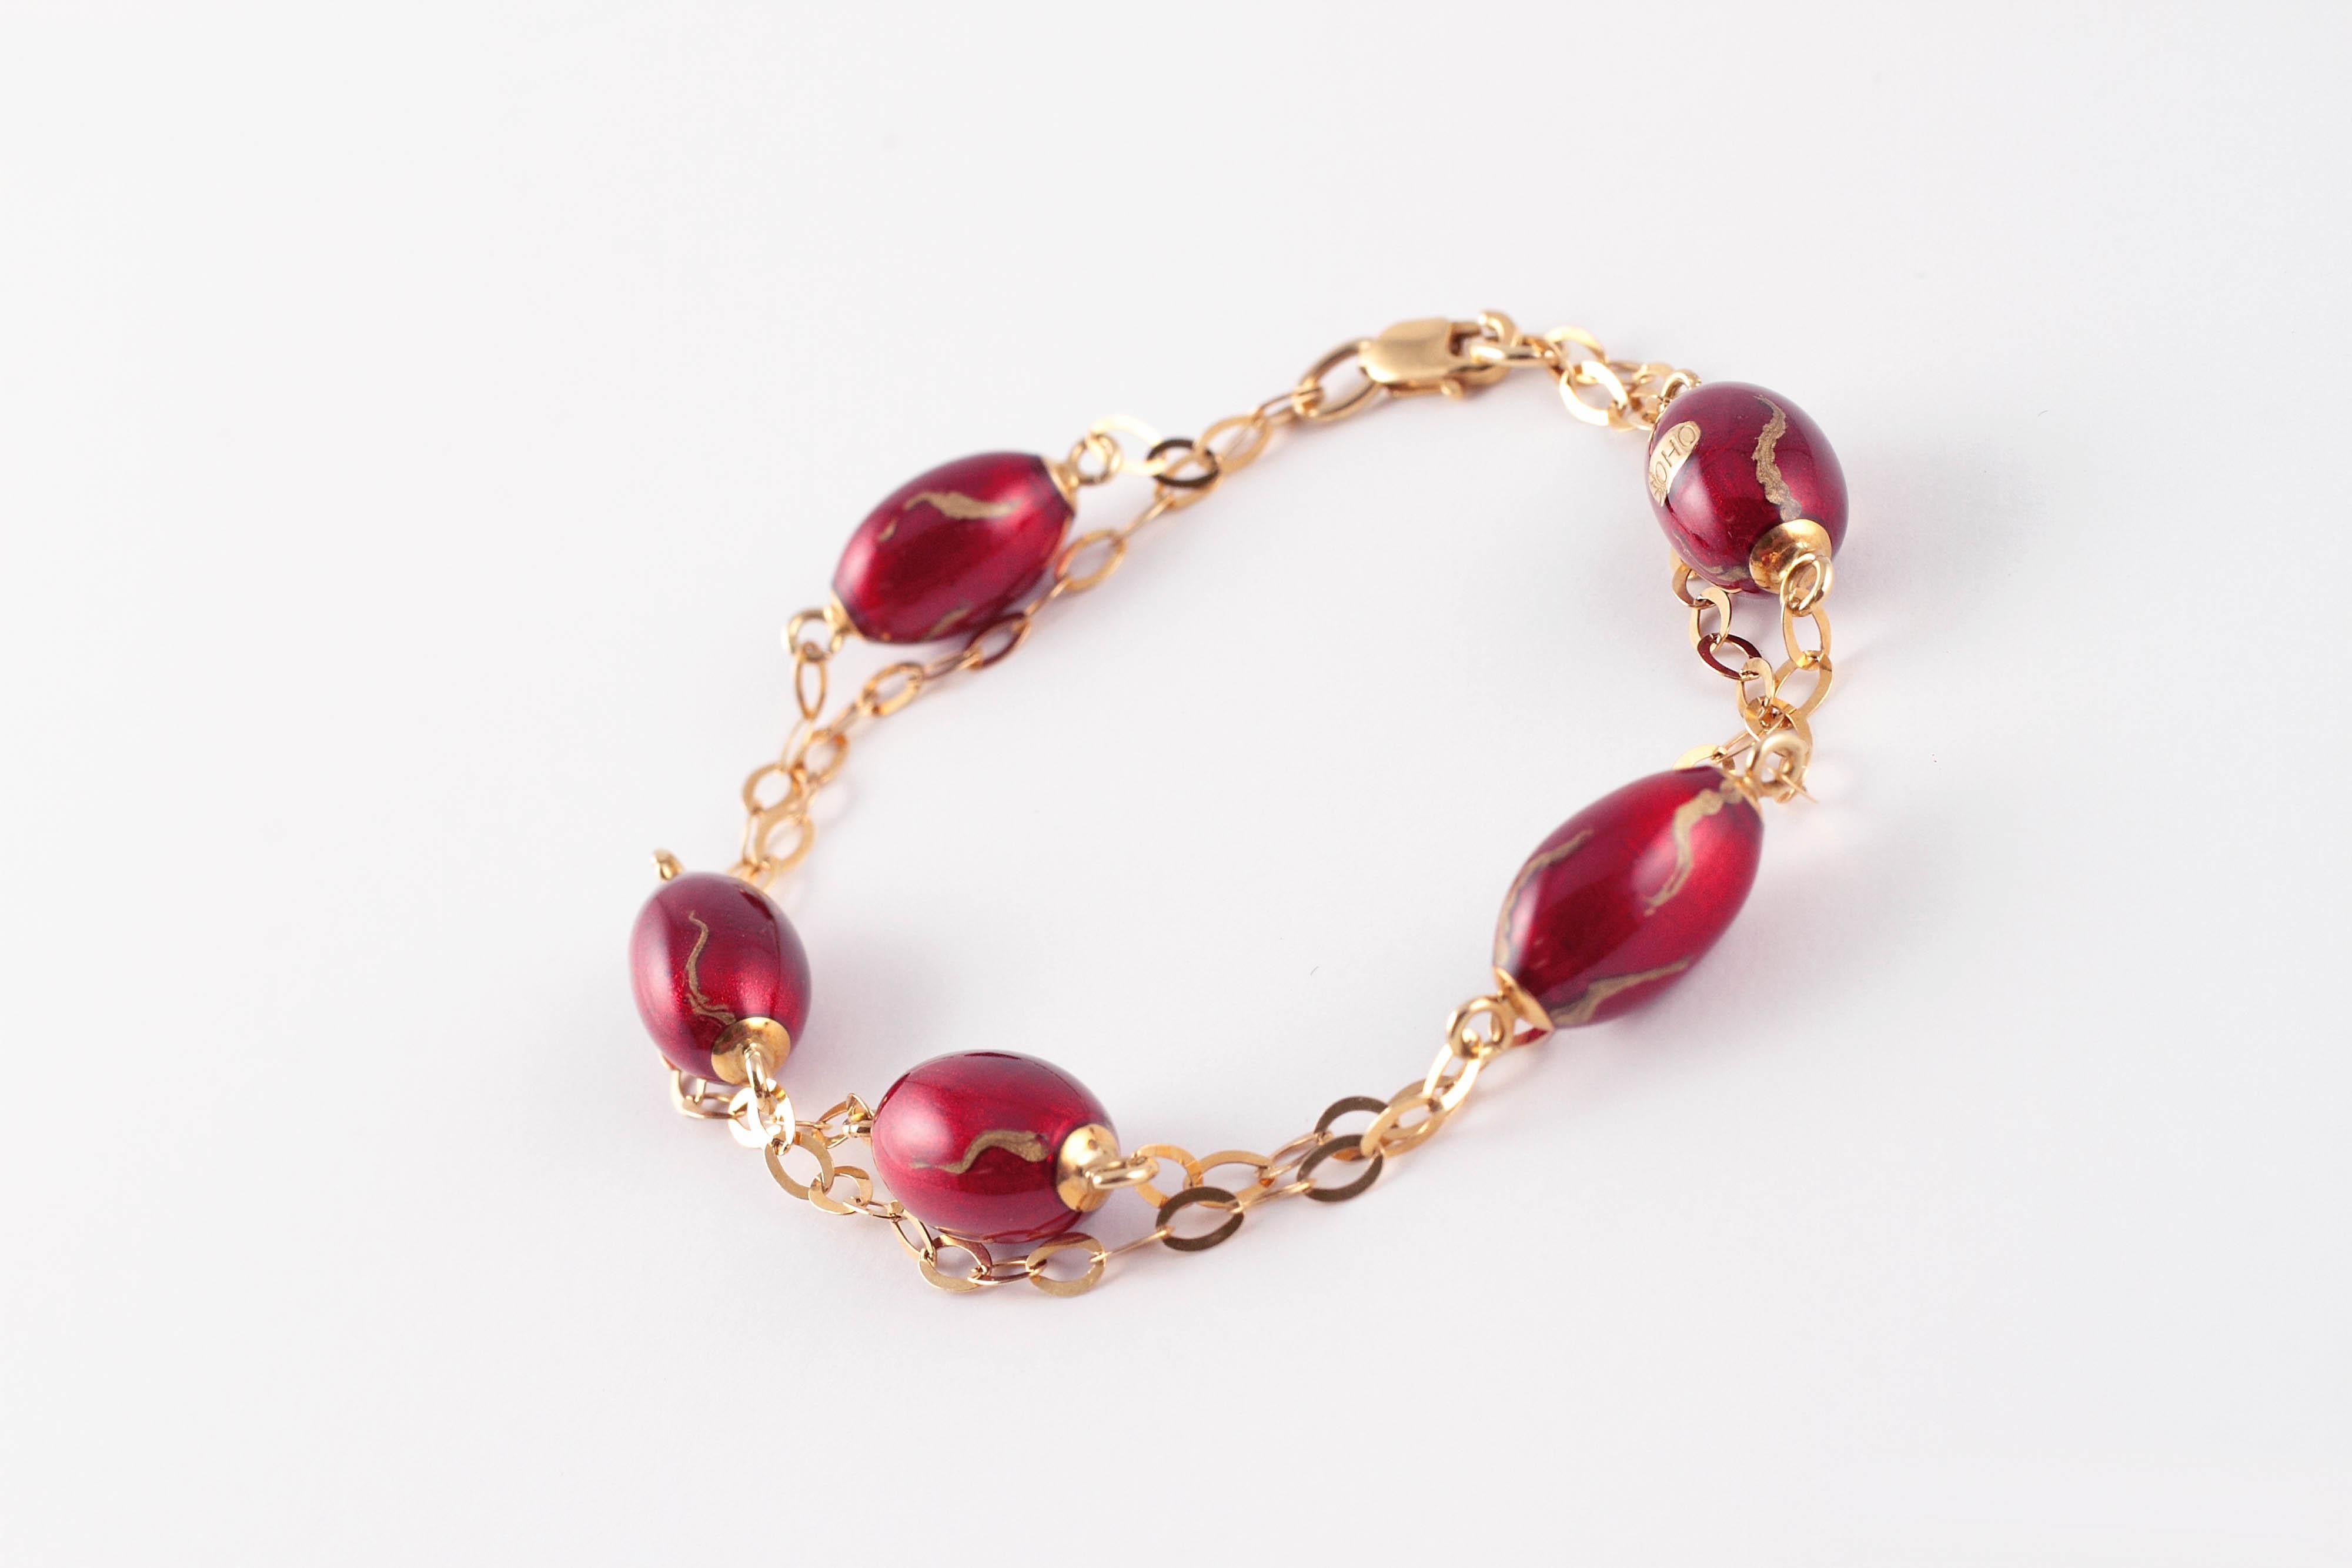 Really out of the ordinary!  This interesting bracelet is composed of two rows of interlocking flat links, alternating with red and enamel beads, secured with a lobster clasp, in 18 karat yellow gold. .